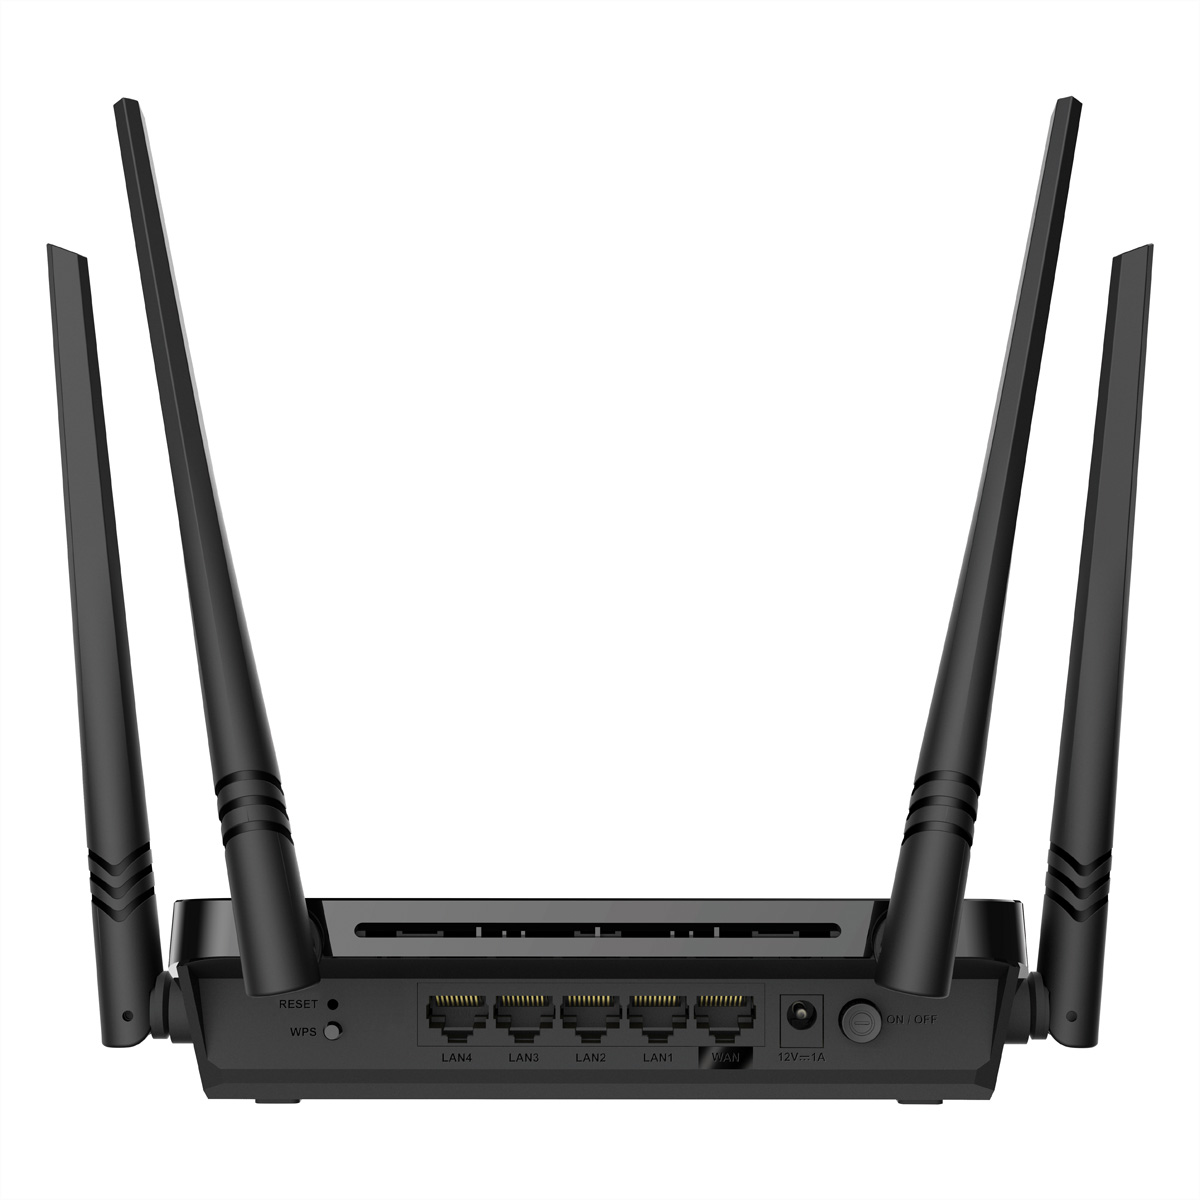 AC1200 Mbit/s Wave2 Wireless Router Dual Band DIR-842V2 WLAN-Router D-LINK 1,200